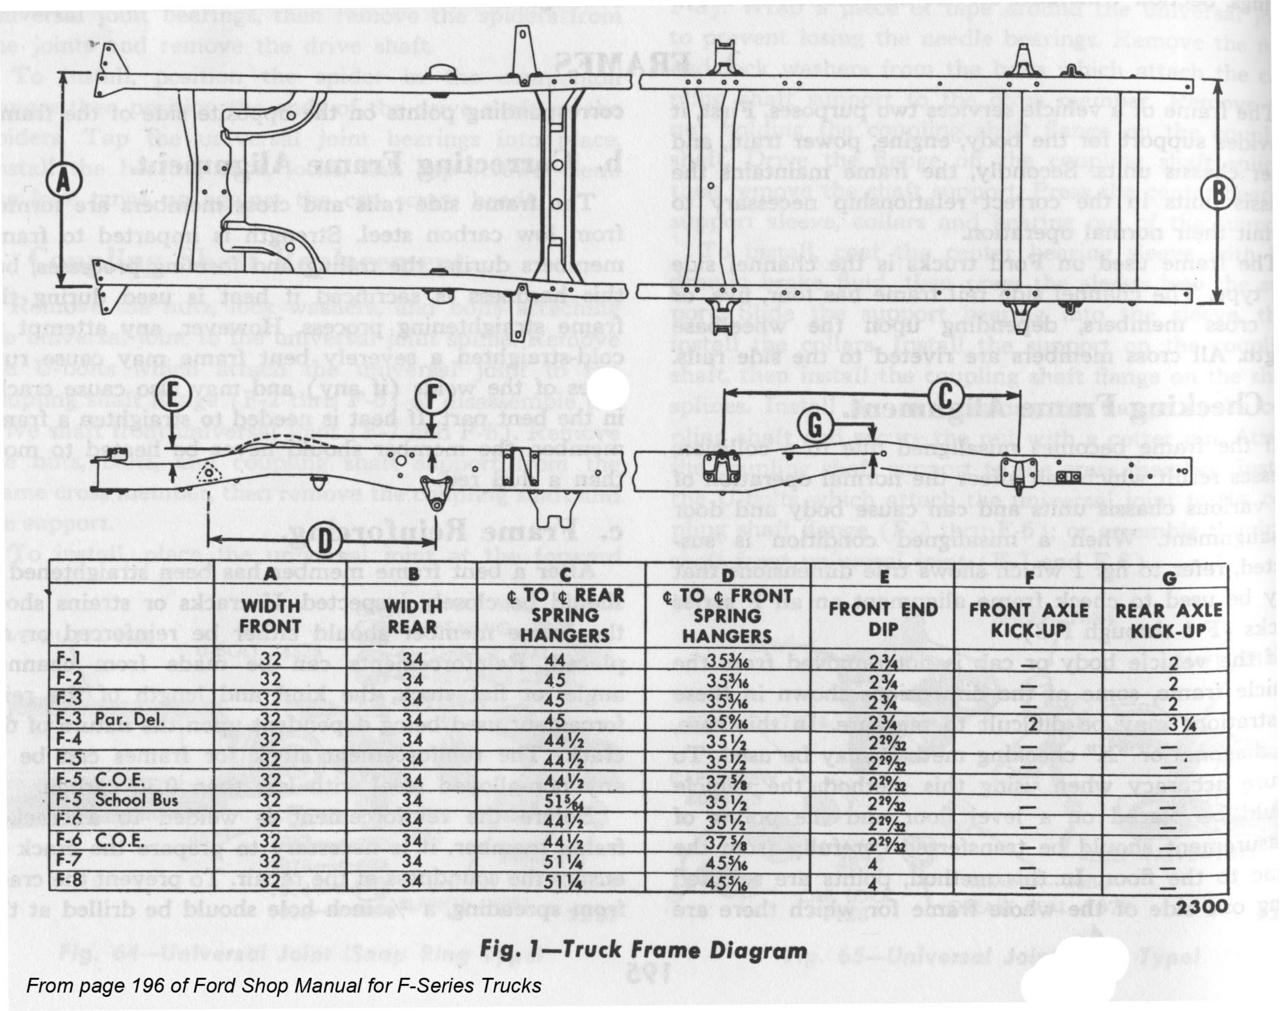 1950 Ford truck specifications #10